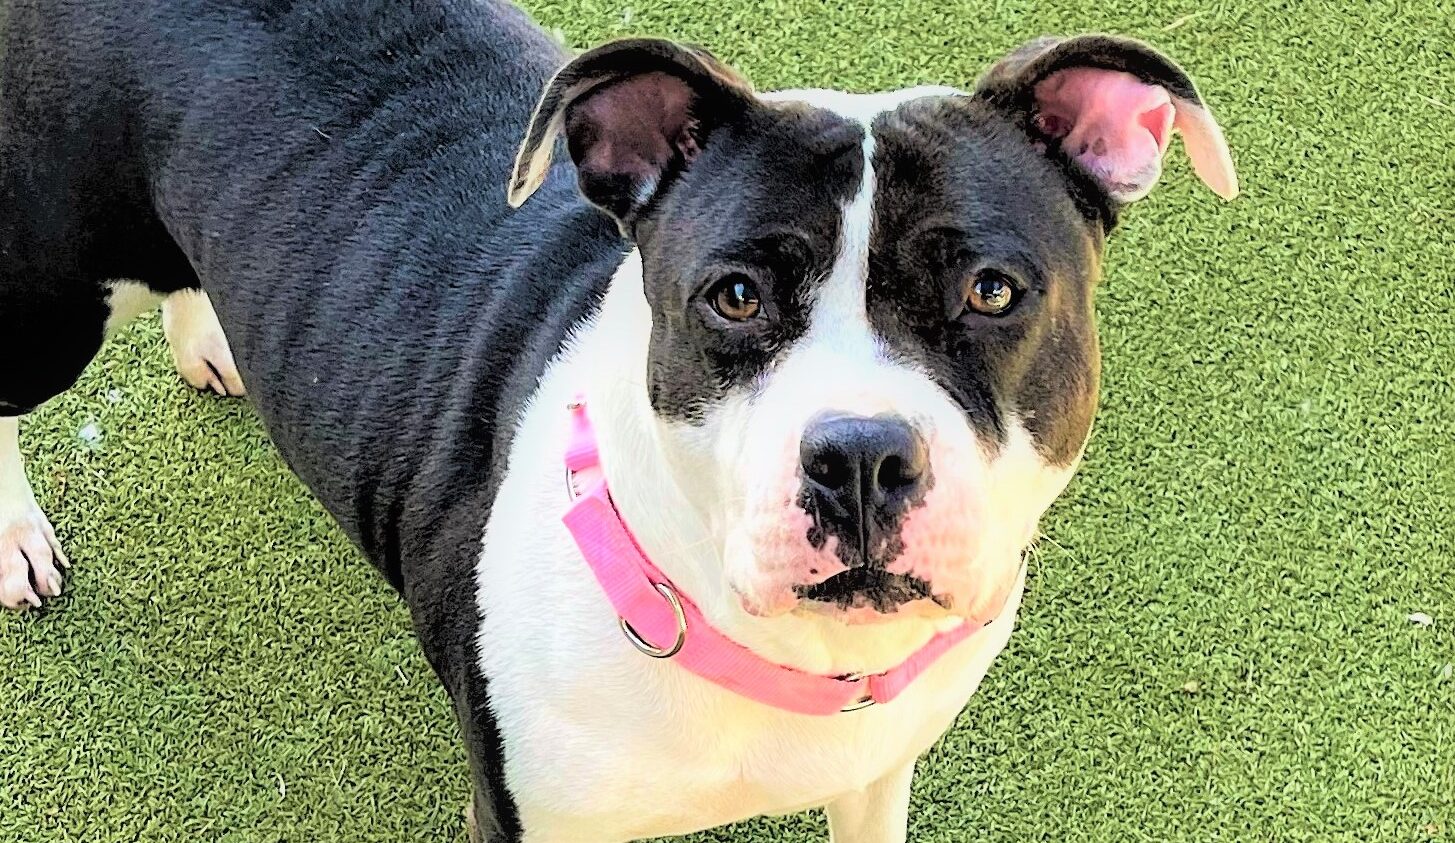 Dog of the Week: This American Bulldog Mix is a Social Butterfly